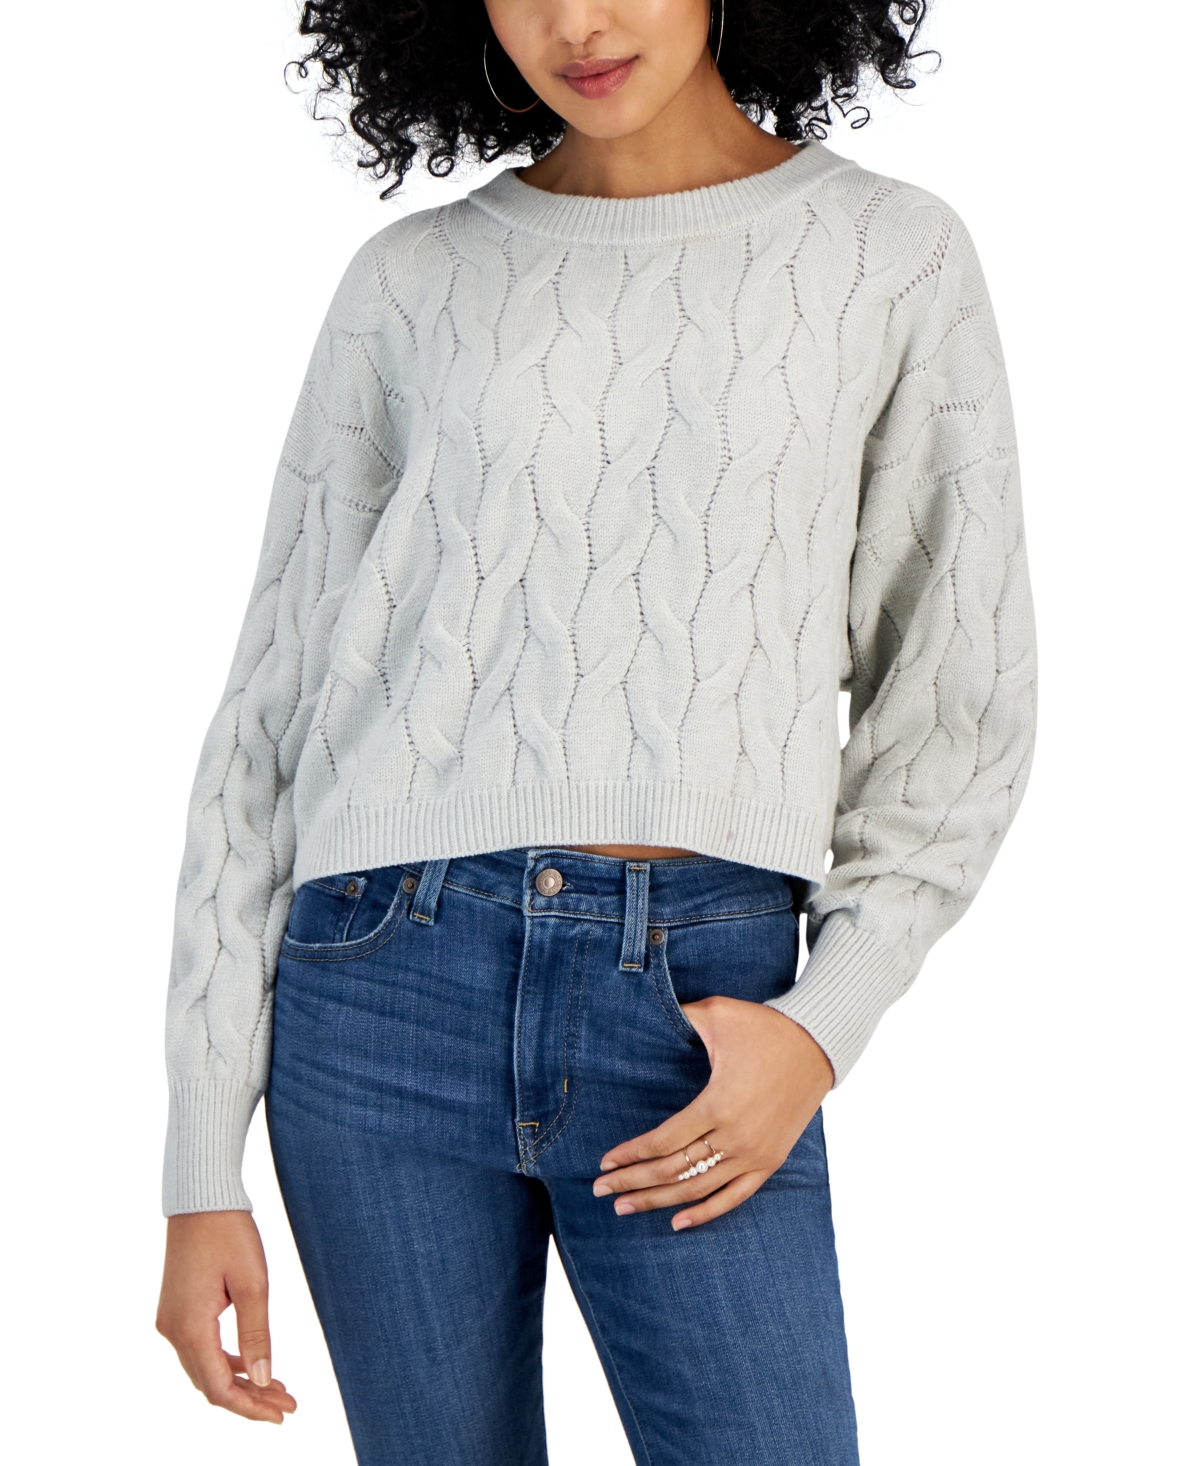 Juniors' Cable-Knit Cropped Crewneck Sweater - White Heather Grey